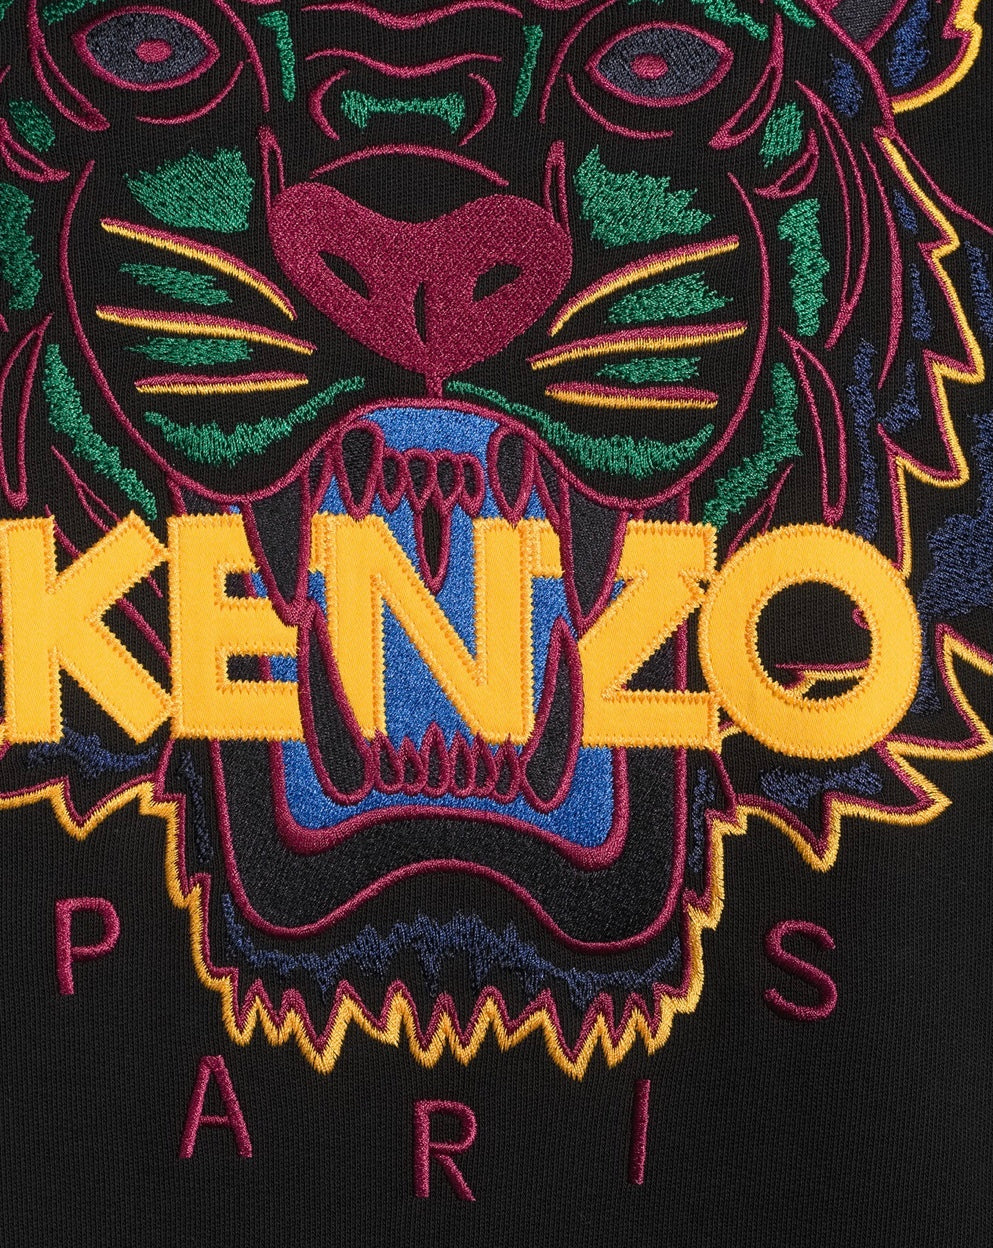 Kenzo Tiger Hoodie - Shop Streetwear, Sneakers, Slippers and Gifts online | Malaysia - The Factory KL